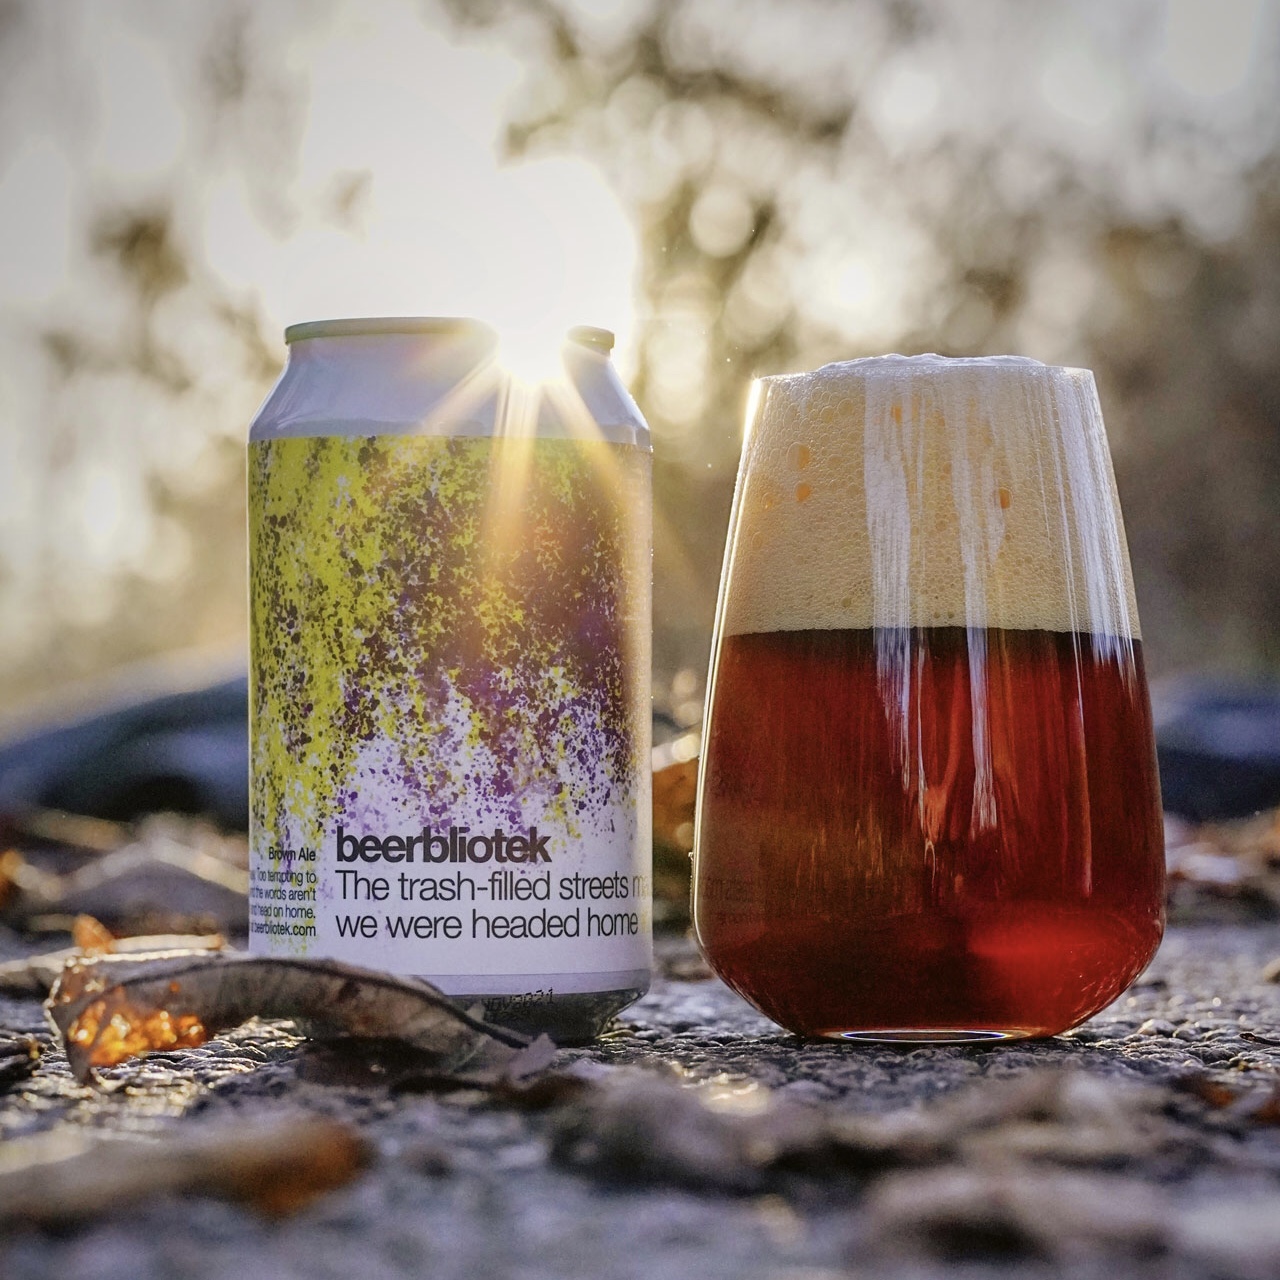 A tasting photo of The trash-filled streets made me wish we were headed home, a Brown Ale brewed in Gothenburg, by Swedish Craft Brewery Beerbliotek.